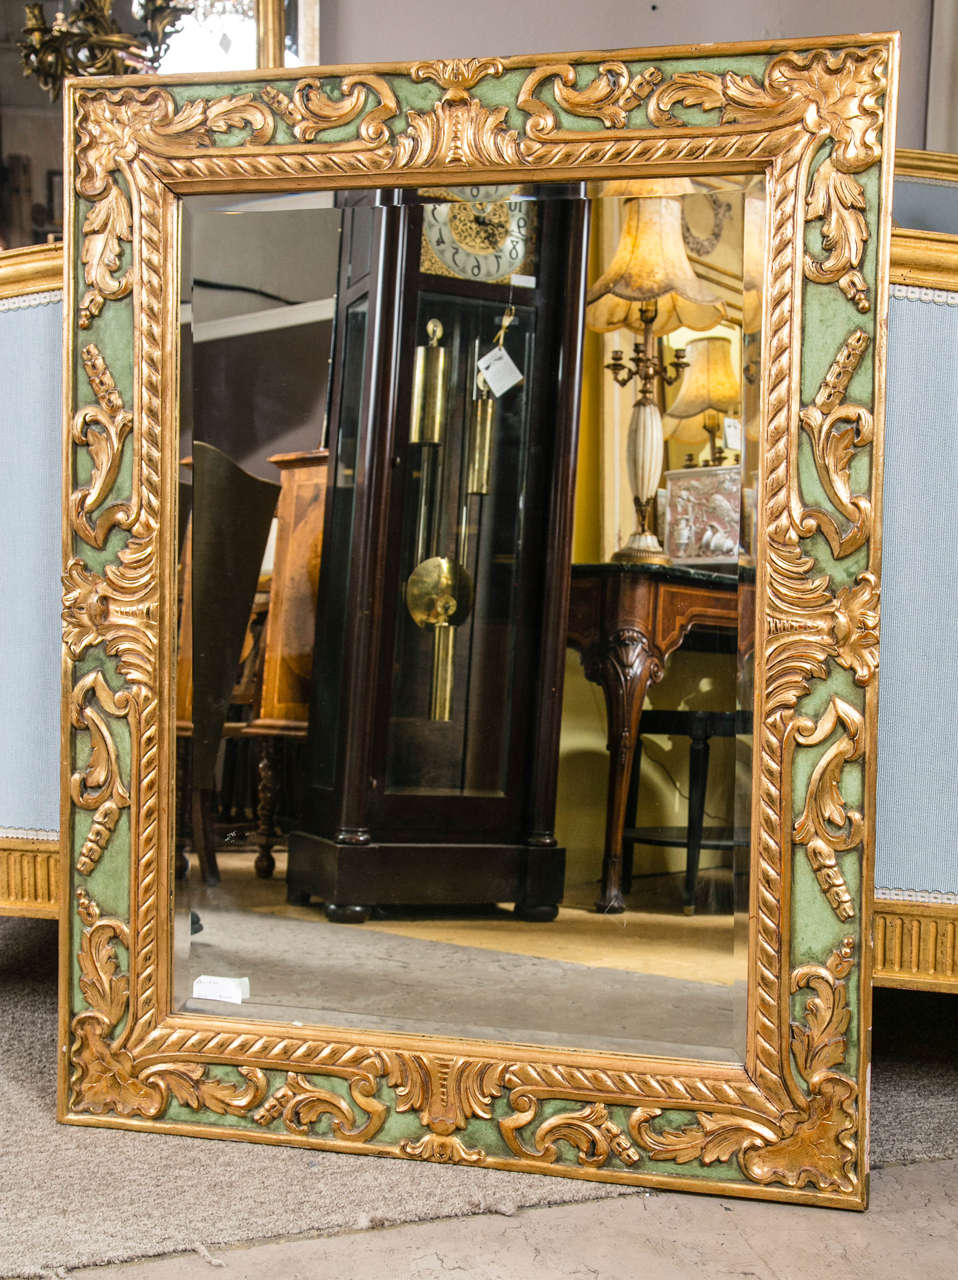 An early example of Jansen quality is exemplified in this green and parcel paint decorated wall mirror. The leaf and vine shell design in a wonderfully done gilt gold finish. The reverse with mortise and tenon joints.